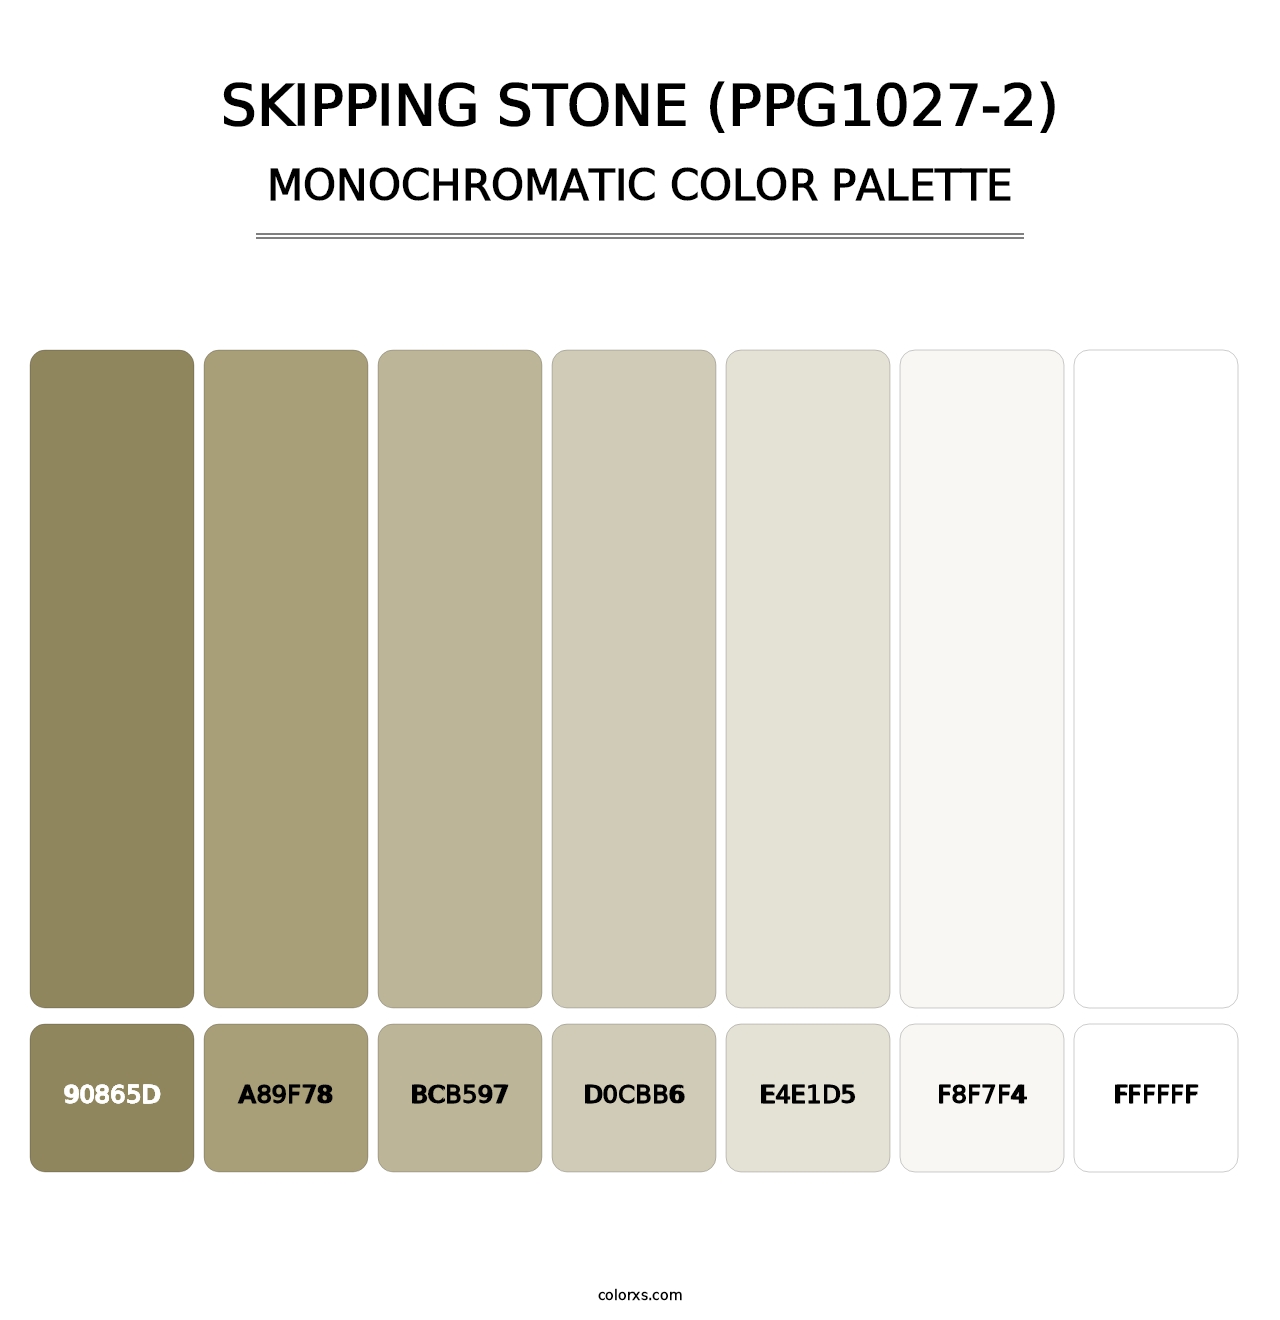 Skipping Stone (PPG1027-2) - Monochromatic Color Palette